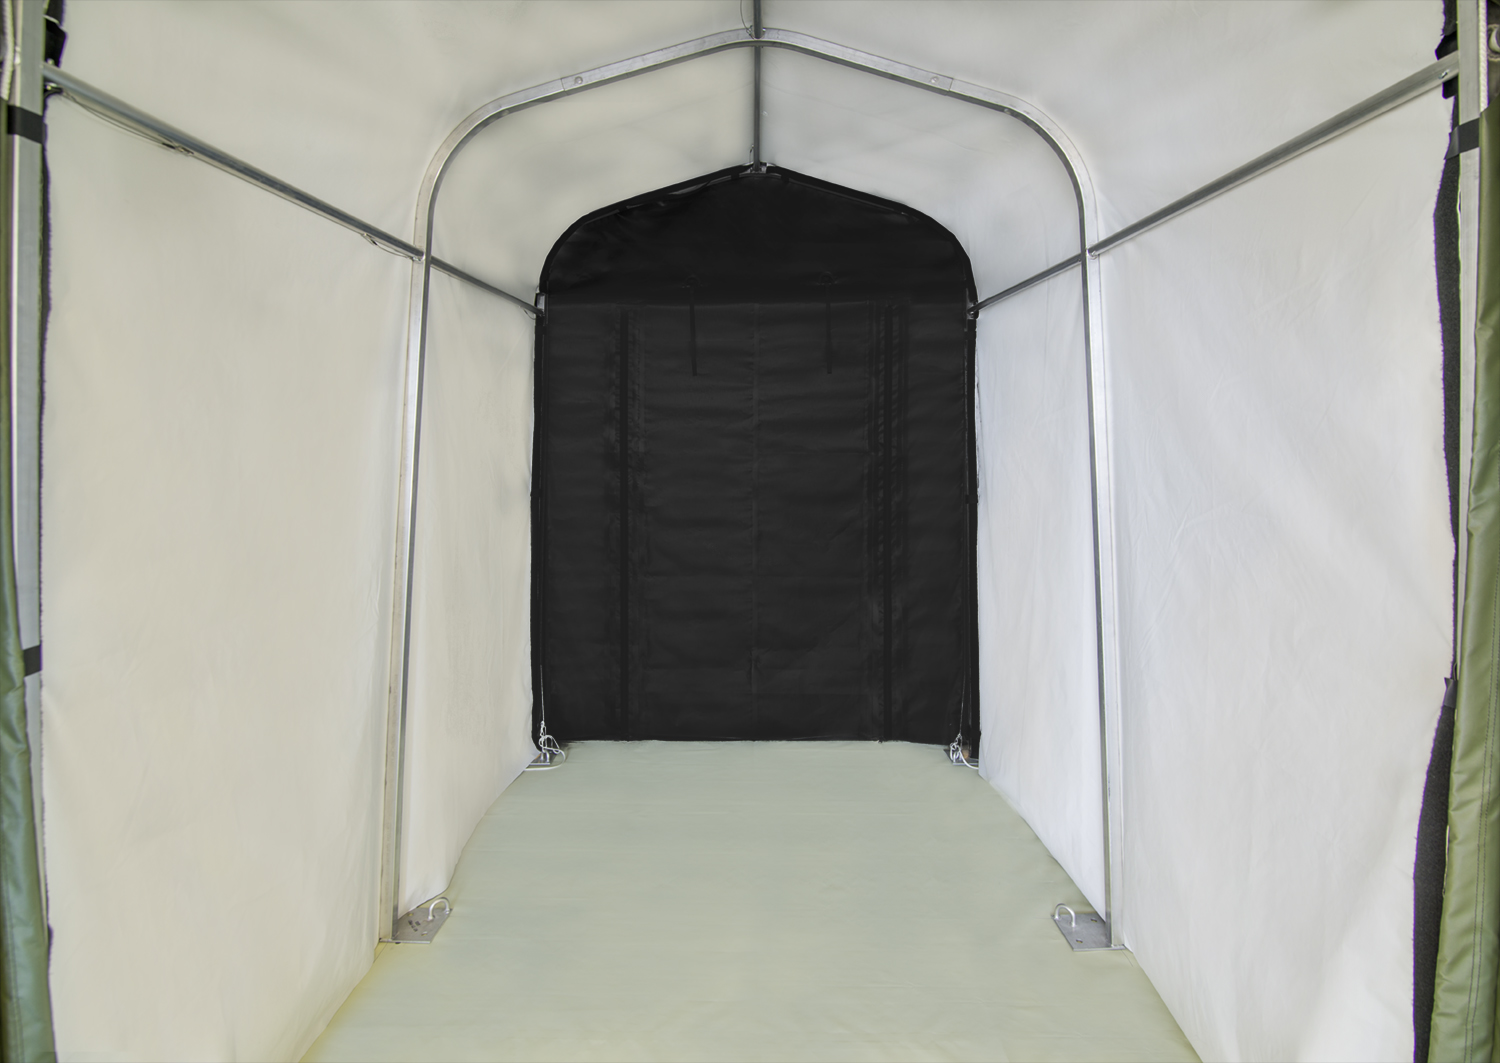 CAMSS Medical Military Shelter Vestibule with Floor Liner - Interior View